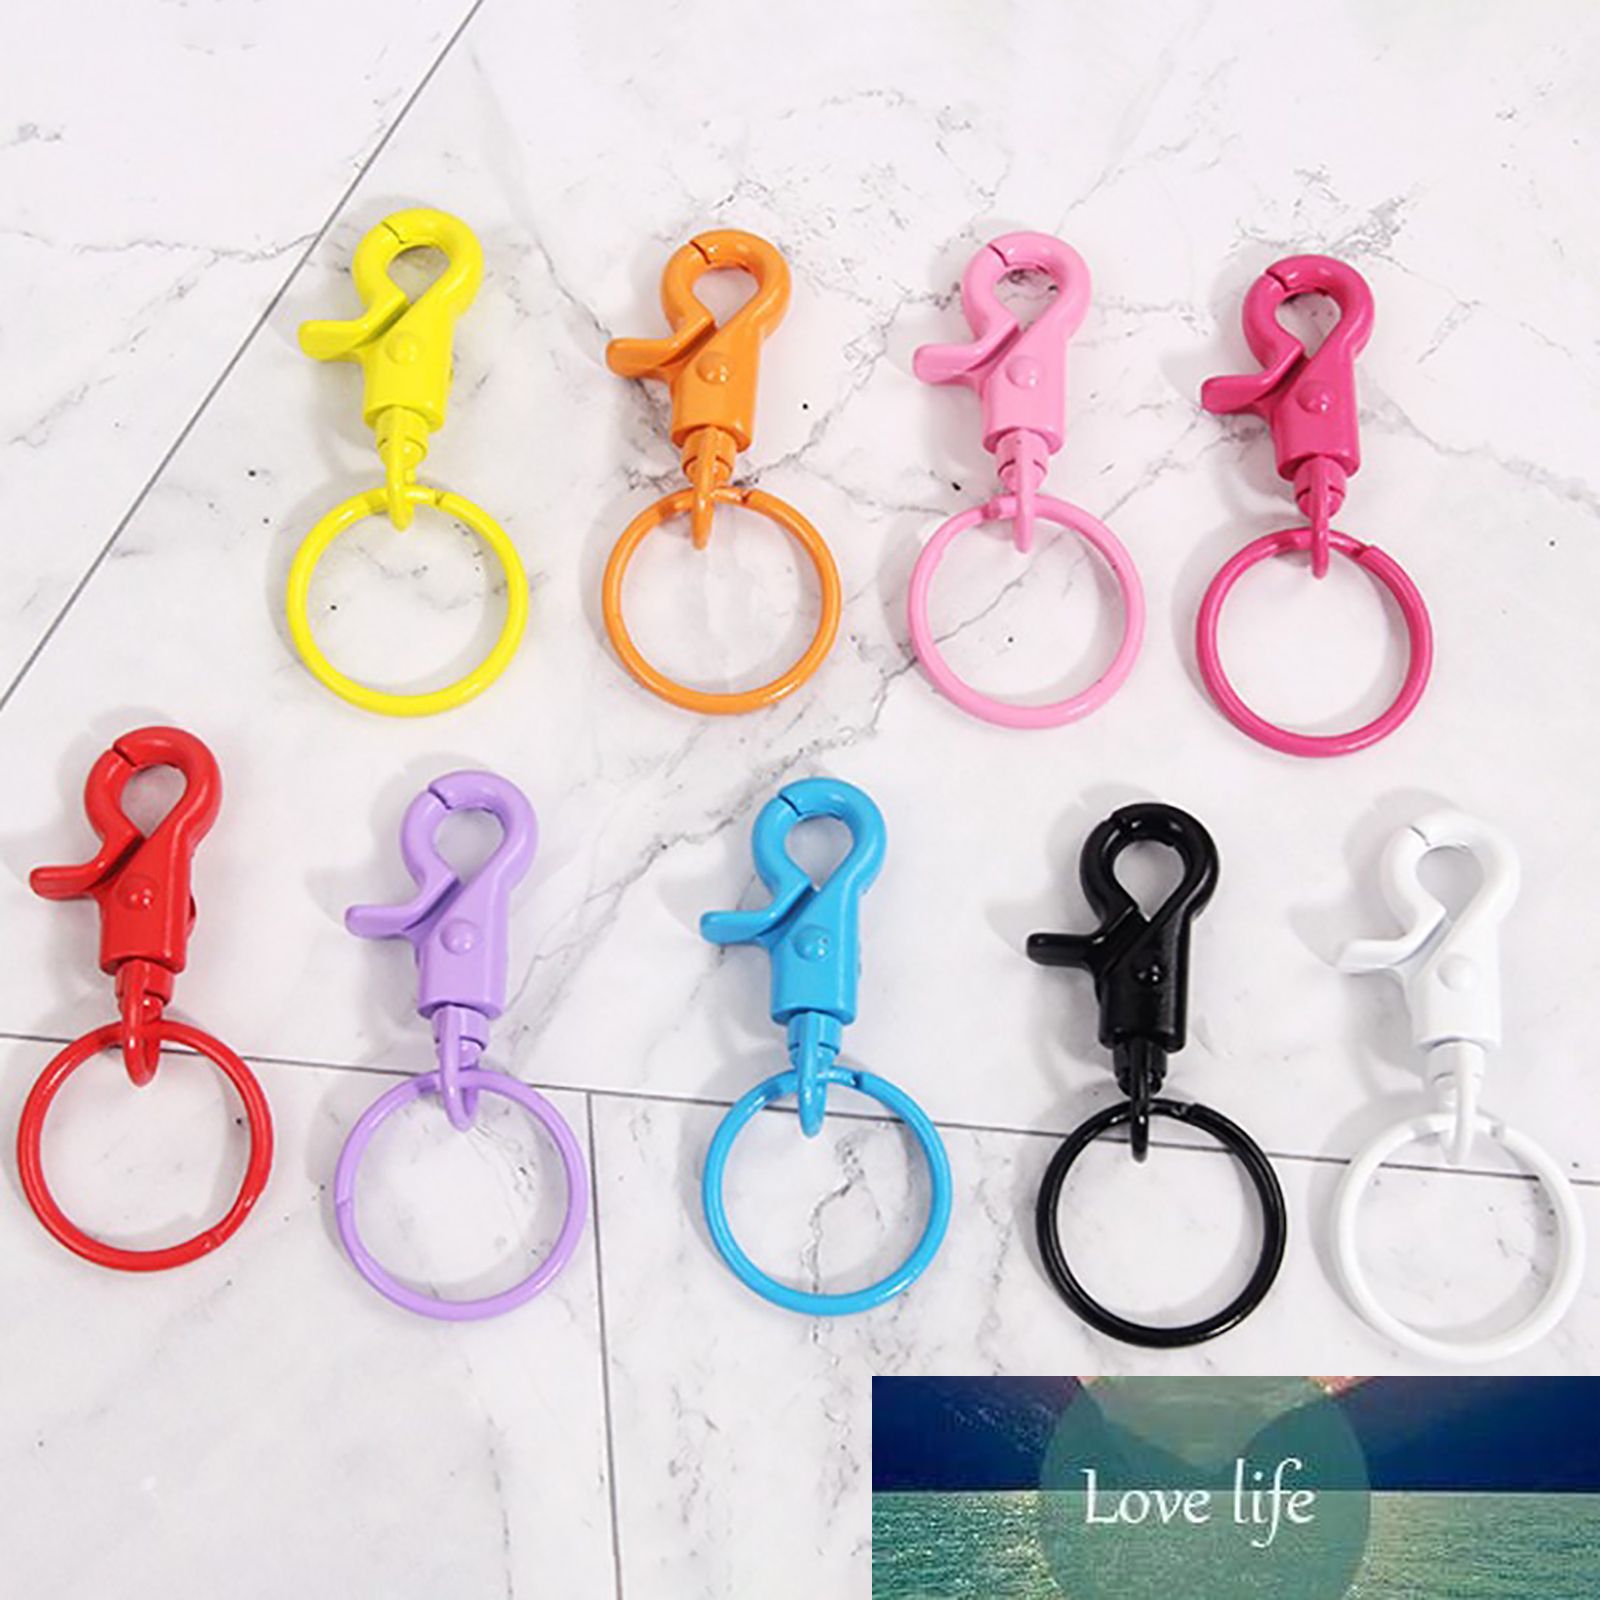 Colorful Metal Swivel Clasp Lanyard Snap Hooks Set Of 10 For DIY Trinkets  From Likegrace, $3.89